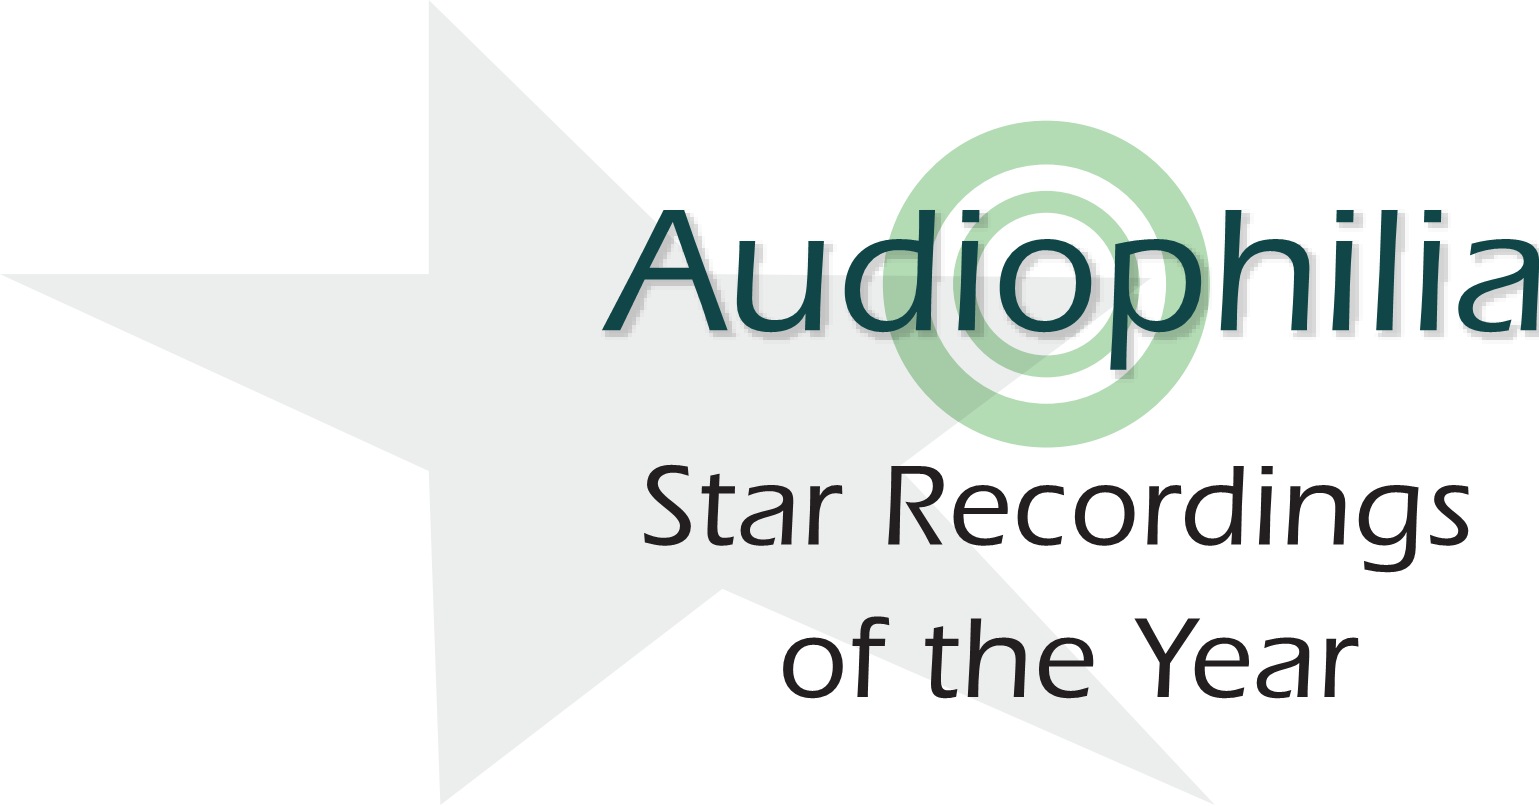 Audiophilia: 'Star Recordings of the Year' (2015)